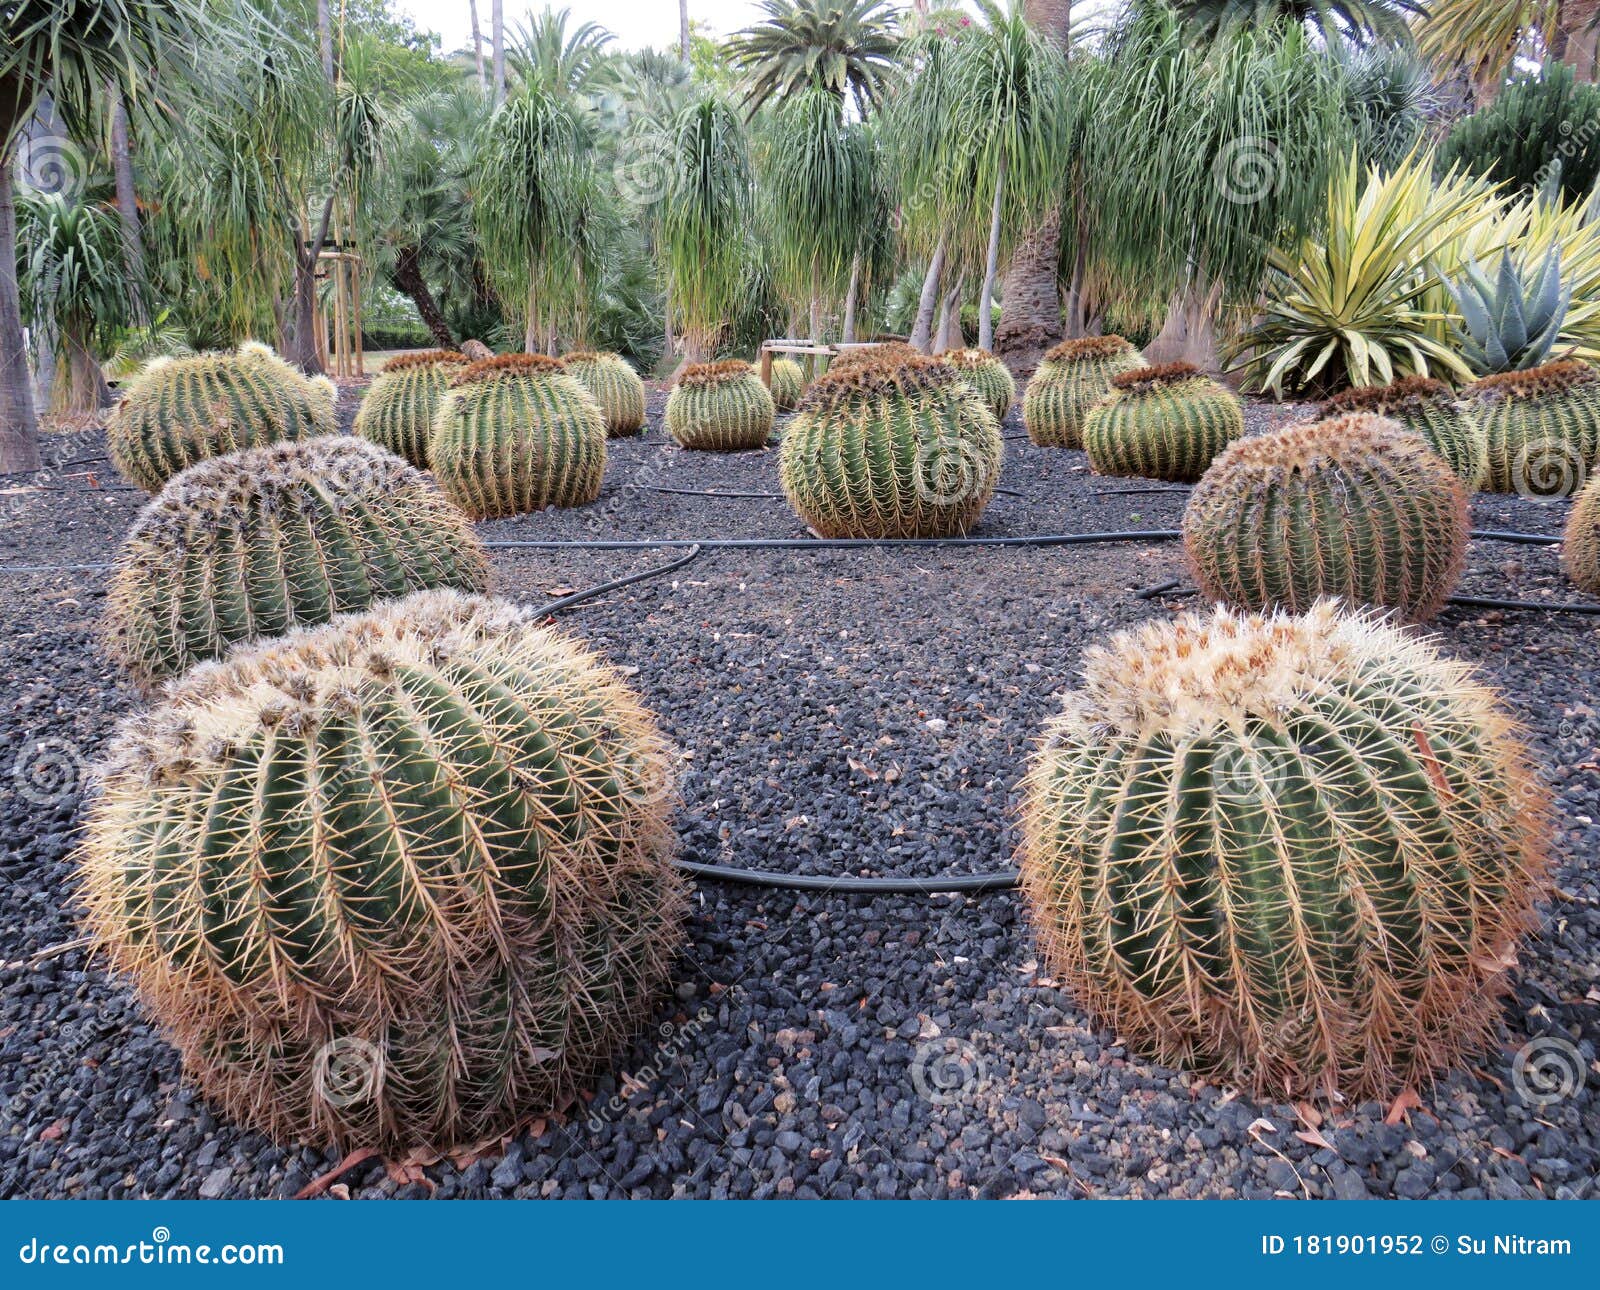 View Of Cactus Garden. Large Round Cacti With Spikes In ...